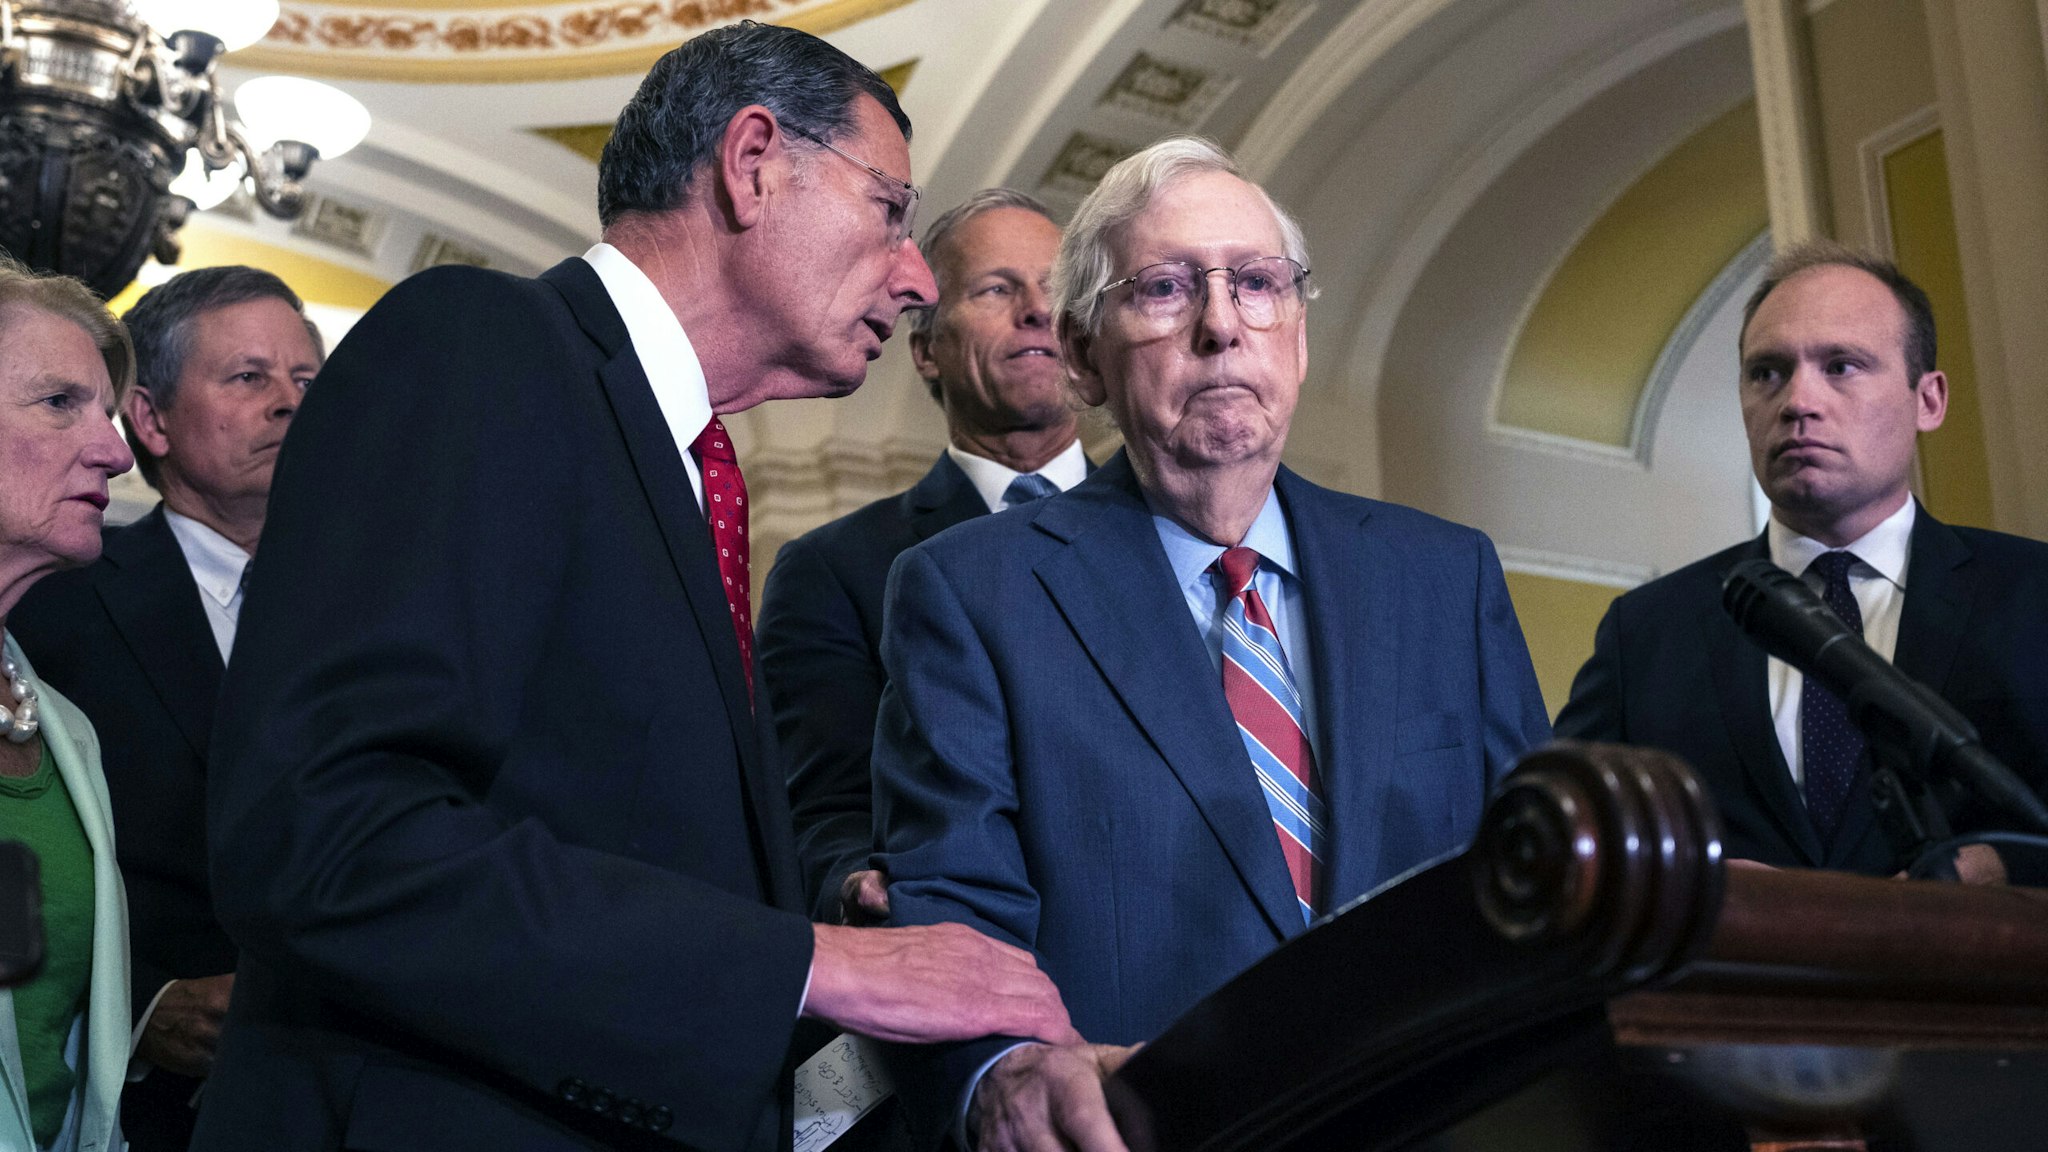 WASHINGTON, DC - JULY 26: (L-R) Sen. John Barrasso (R-WY) reaches out to help Senate Minority Leader Mitch McConnell (R-KY) after McConnell froze and stopped talking at the microphone during a news conference after a lunch meeting with Senate Republicans U.S. Capitol 26, 2023 in Washington, DC. Also pictured, L-R, Sen. Shelley Moore Capito (R-WV), Sen. Steve Daines (R-MT), Sen. John Thune (R-SD) and Sen. Joni Ernst (R-IA). McConnell was escorted back to his office and later returned to the news conference and answered questions.